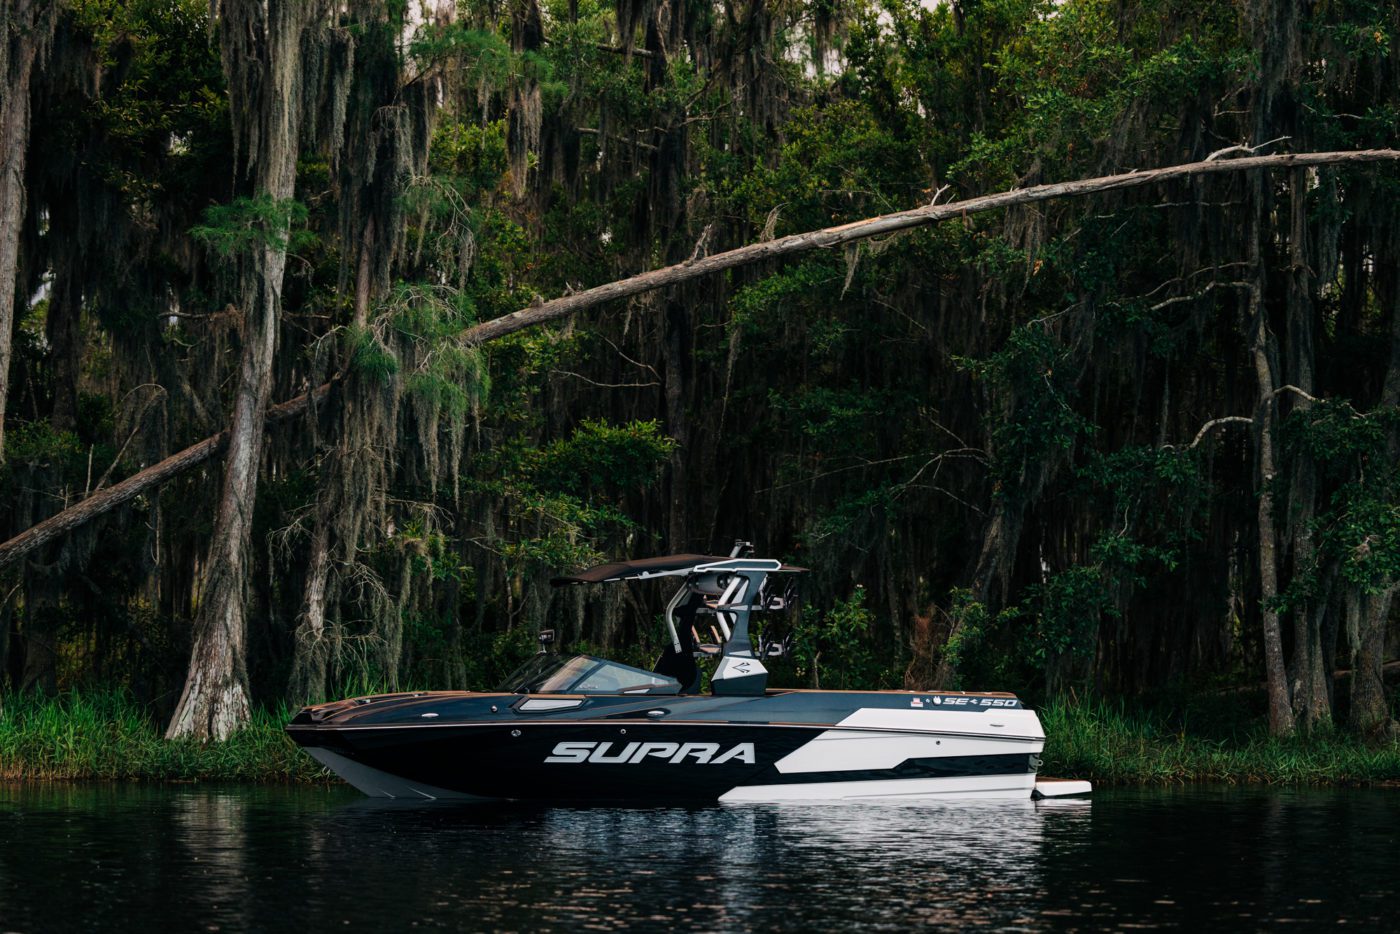 A supra boat like what will be at the Athens In-Water Boat Show